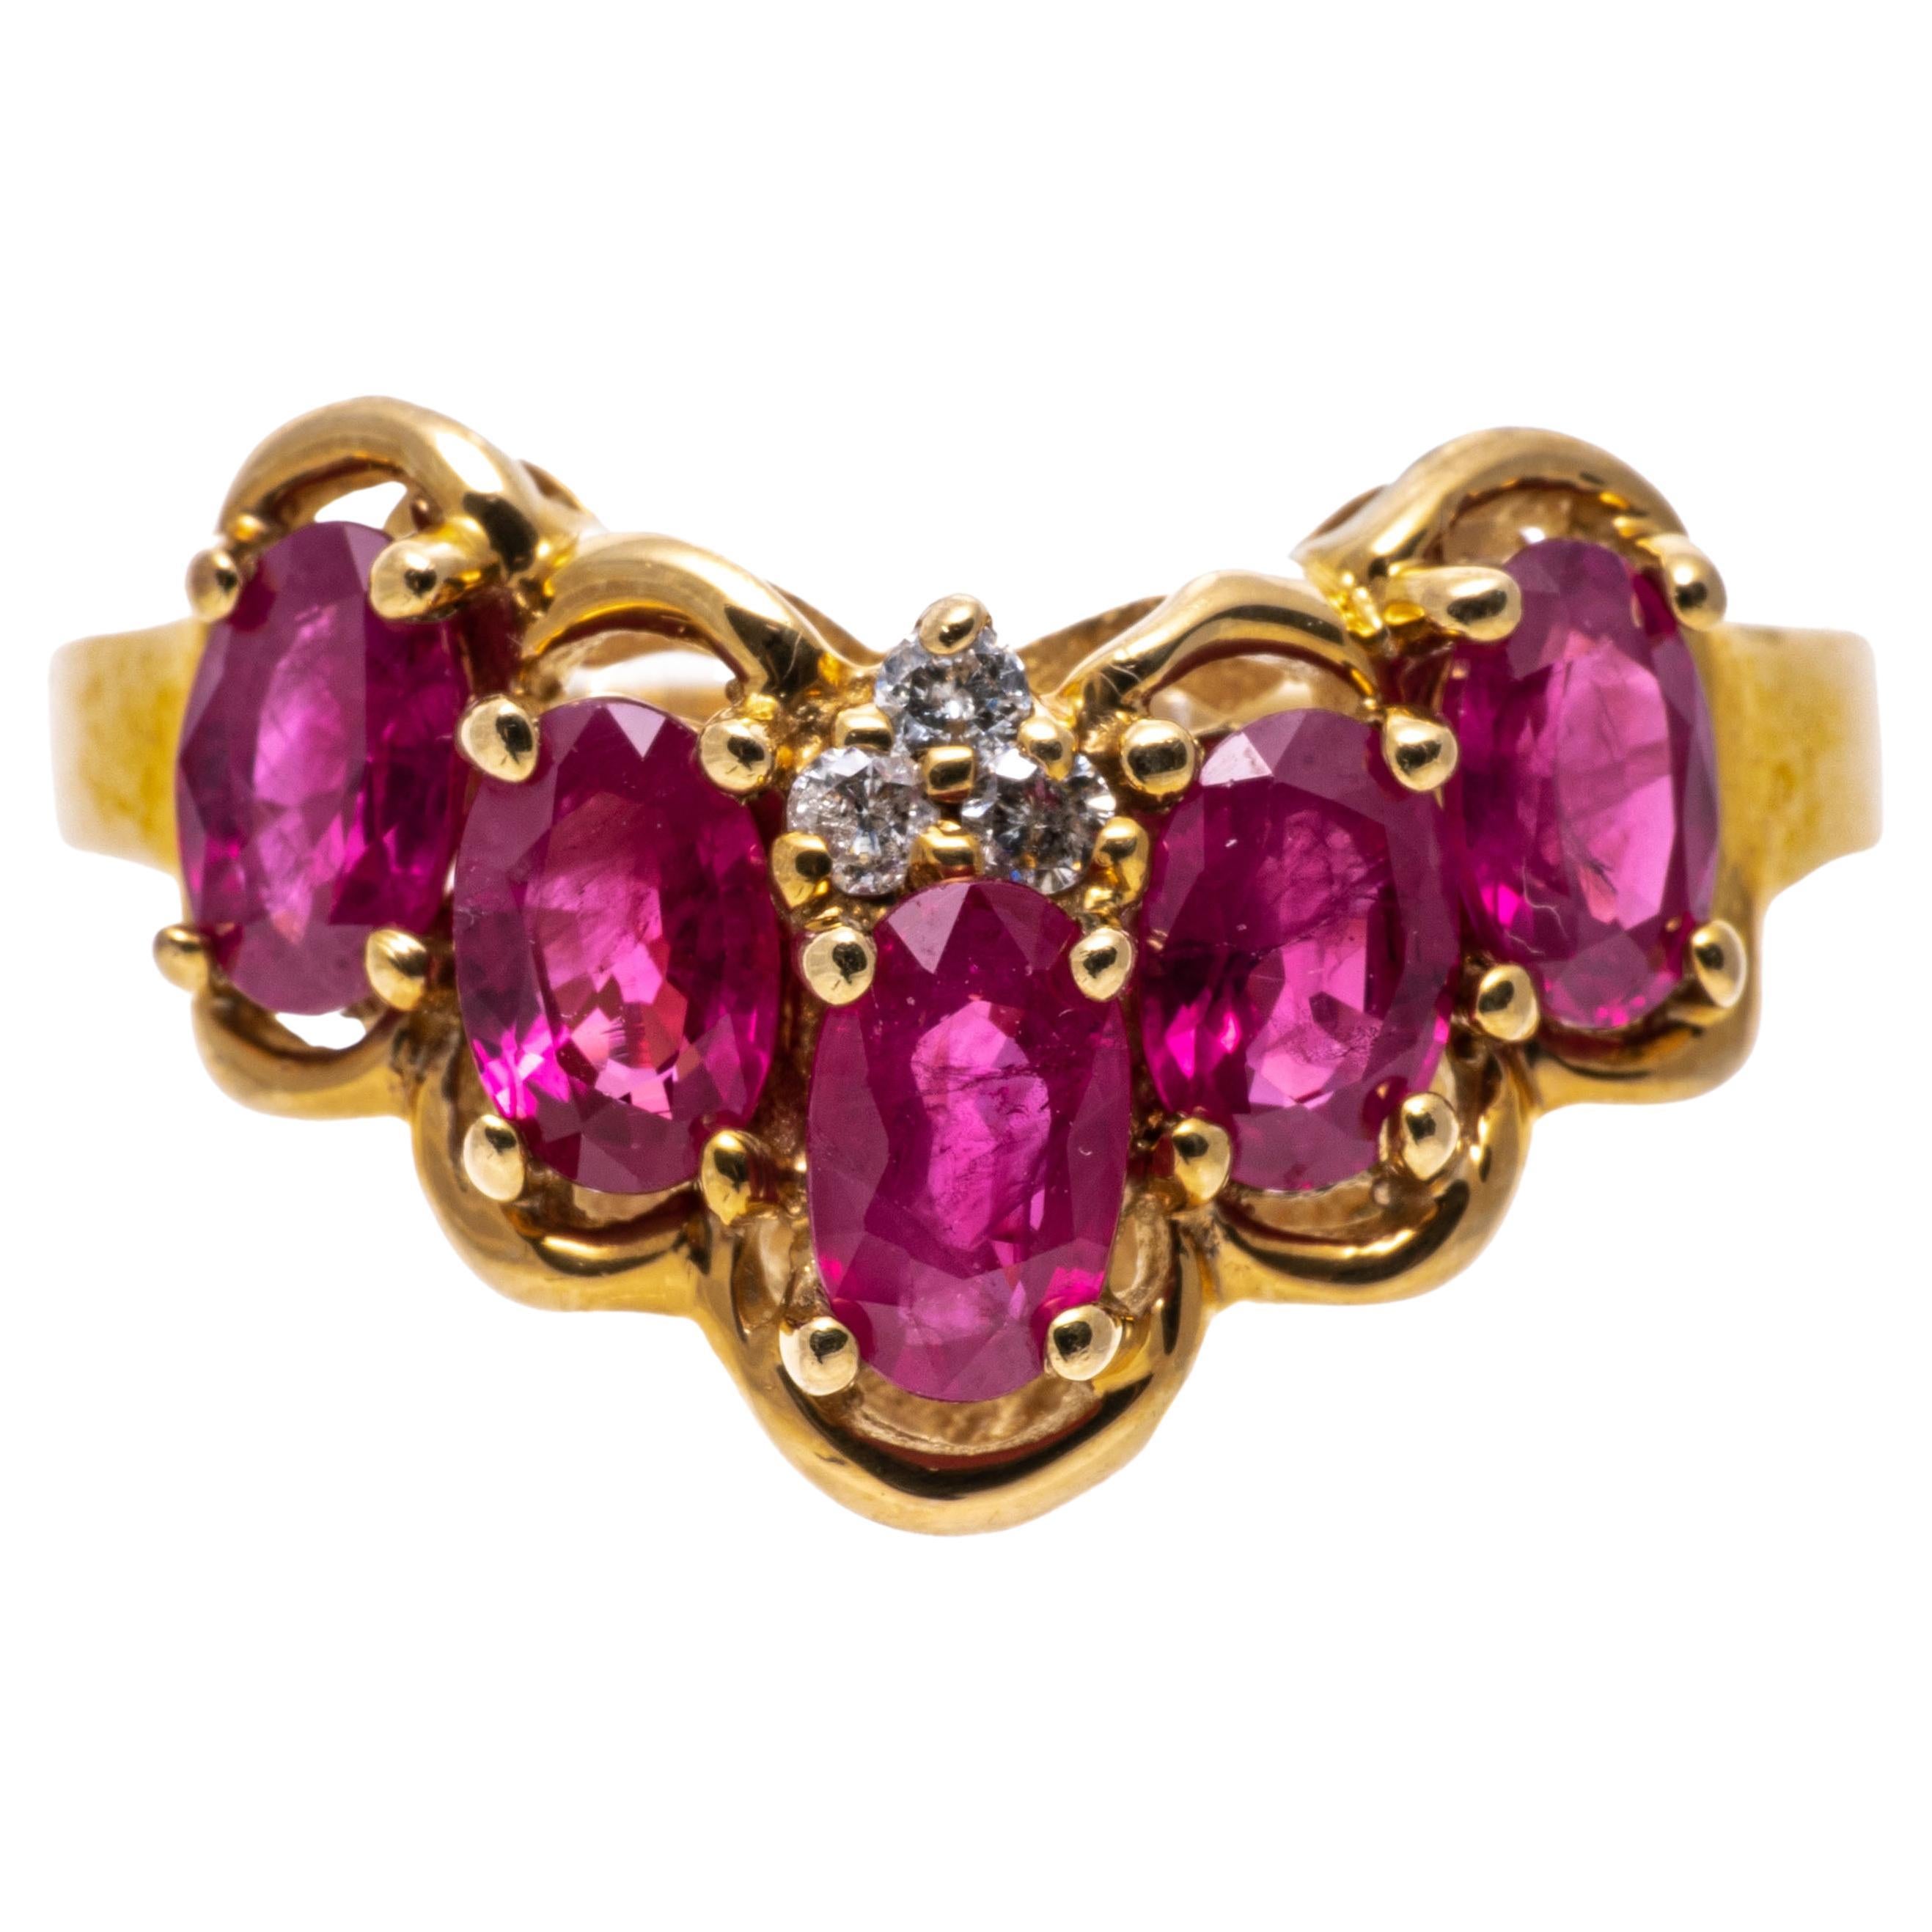 10k Yellow Gold "V" Style Oval Ruby And Diamond Accent Ring